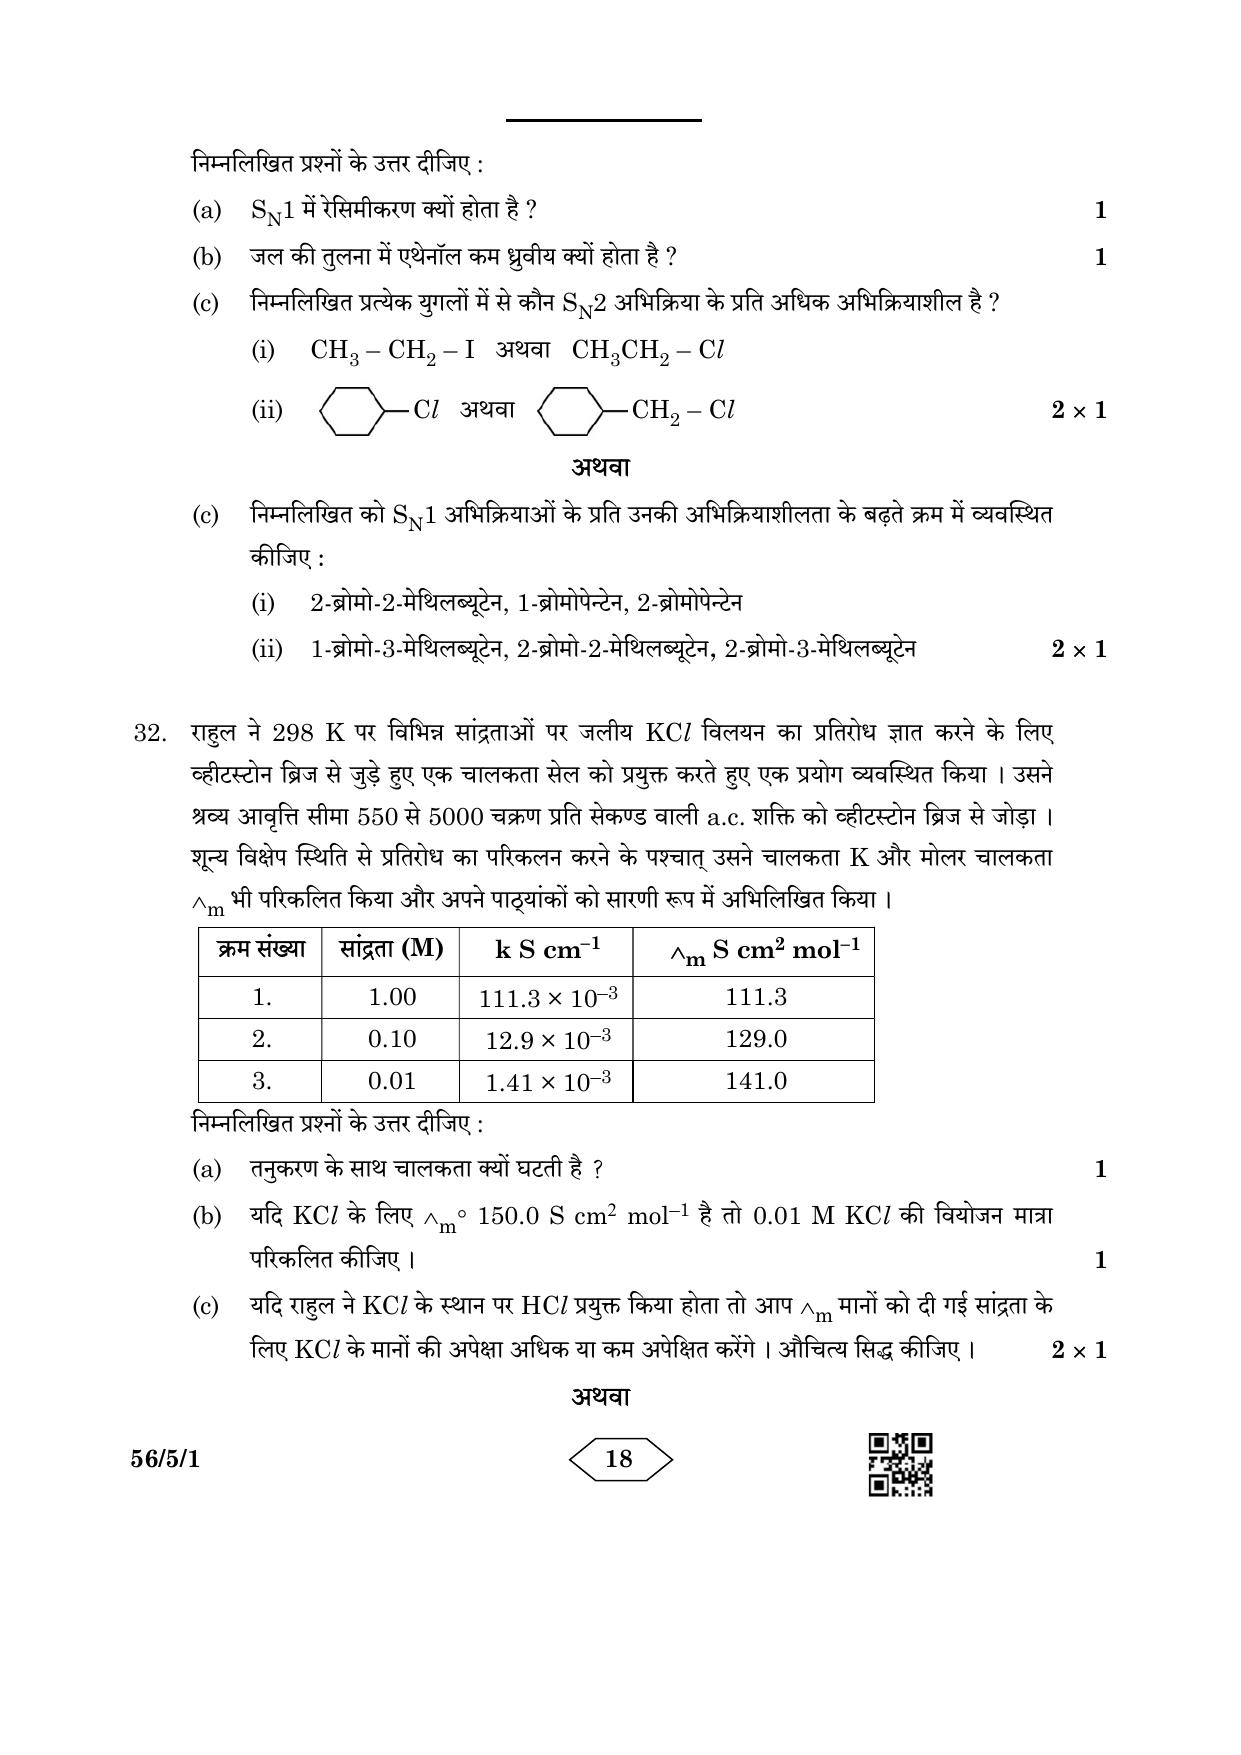 CBSE Class 12 56-5-1 Chemistry 2023 Question Paper - Page 18